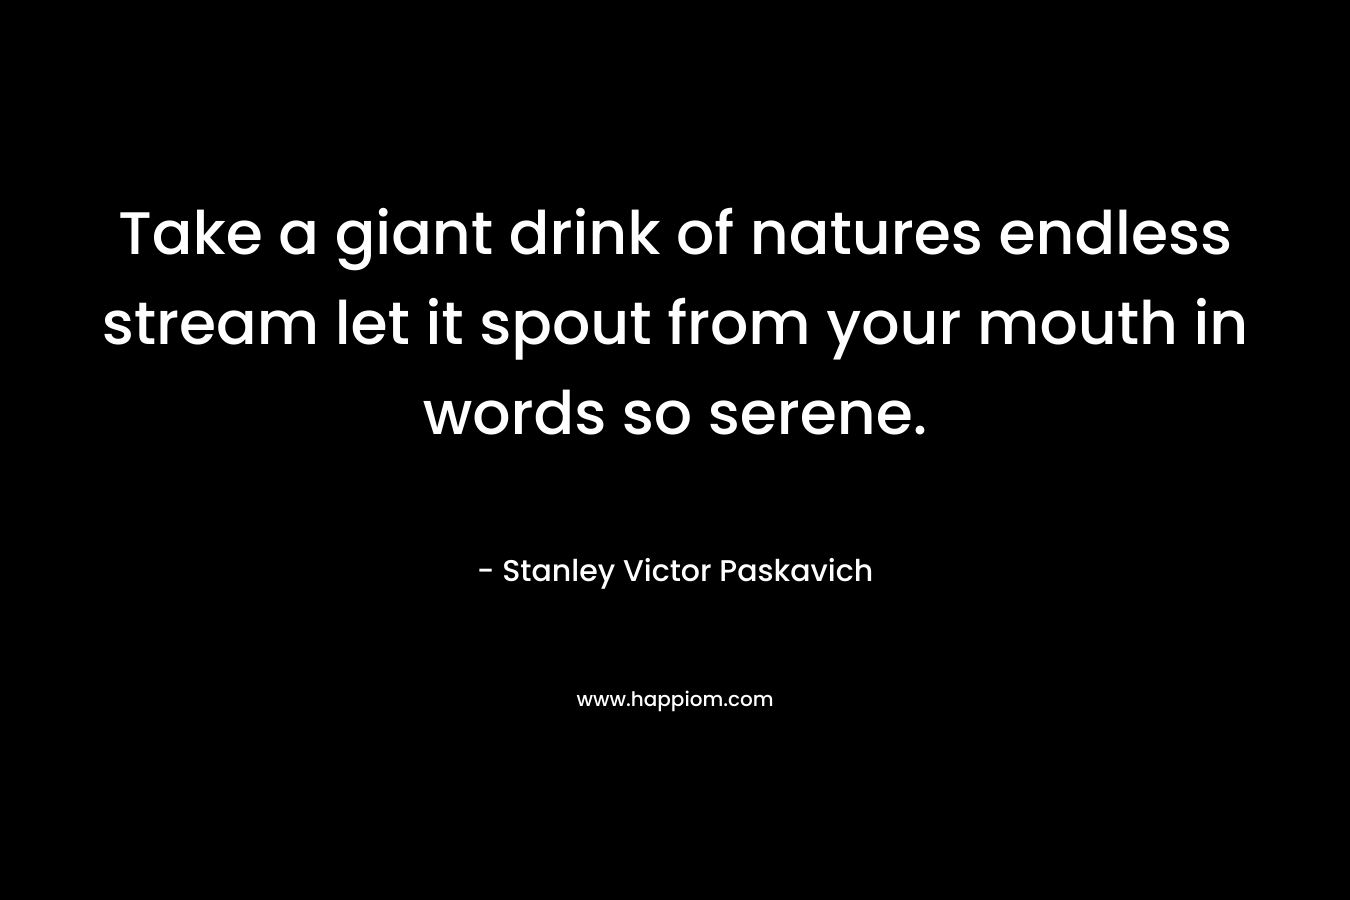 Take a giant drink of natures endless stream let it spout from your mouth in words so serene.